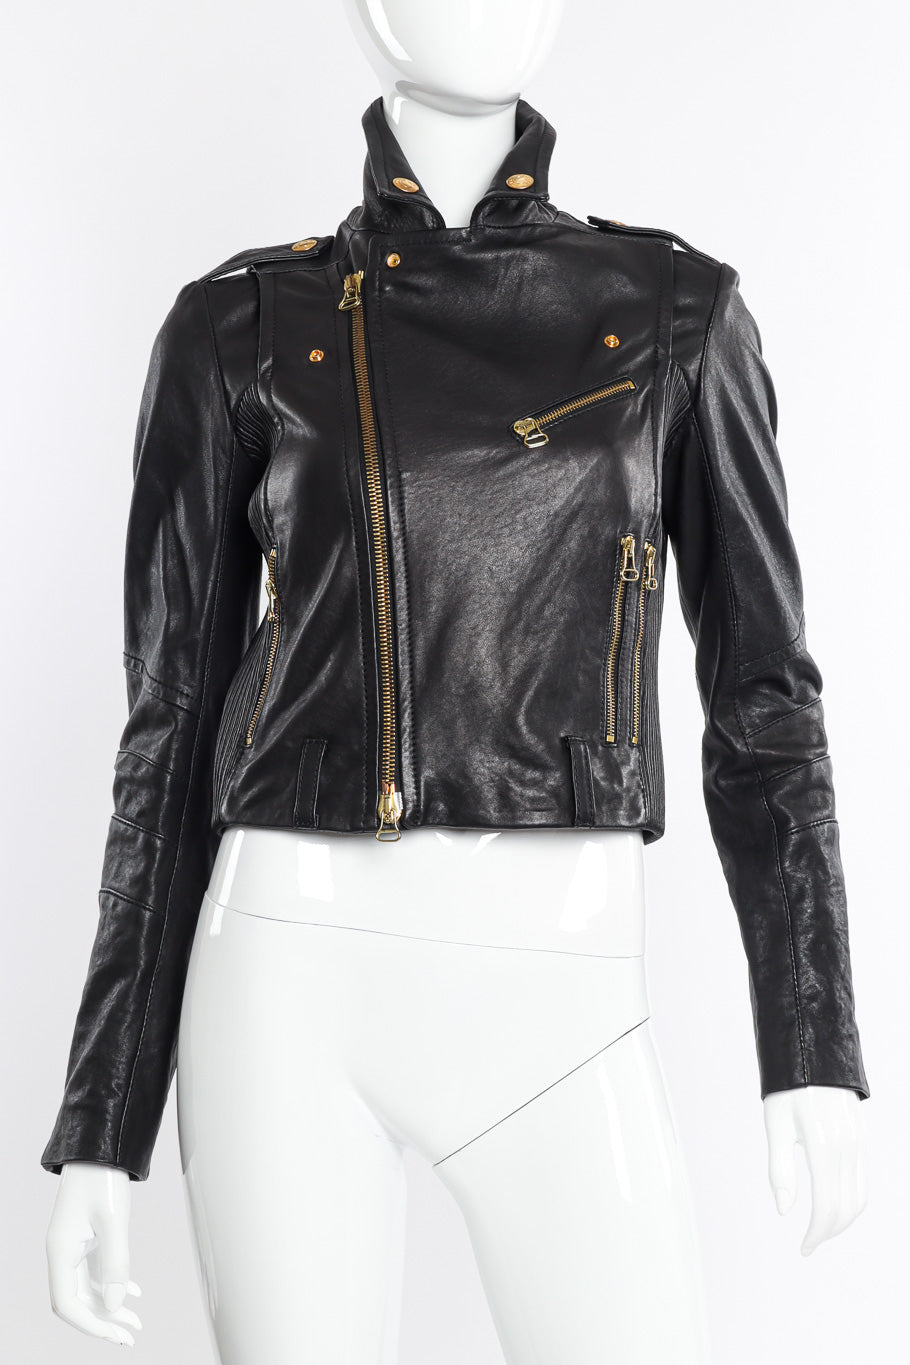 Pierre Balmain Ribbed Leather Moto Jacket front view fully zipped on mannequin @Recessla